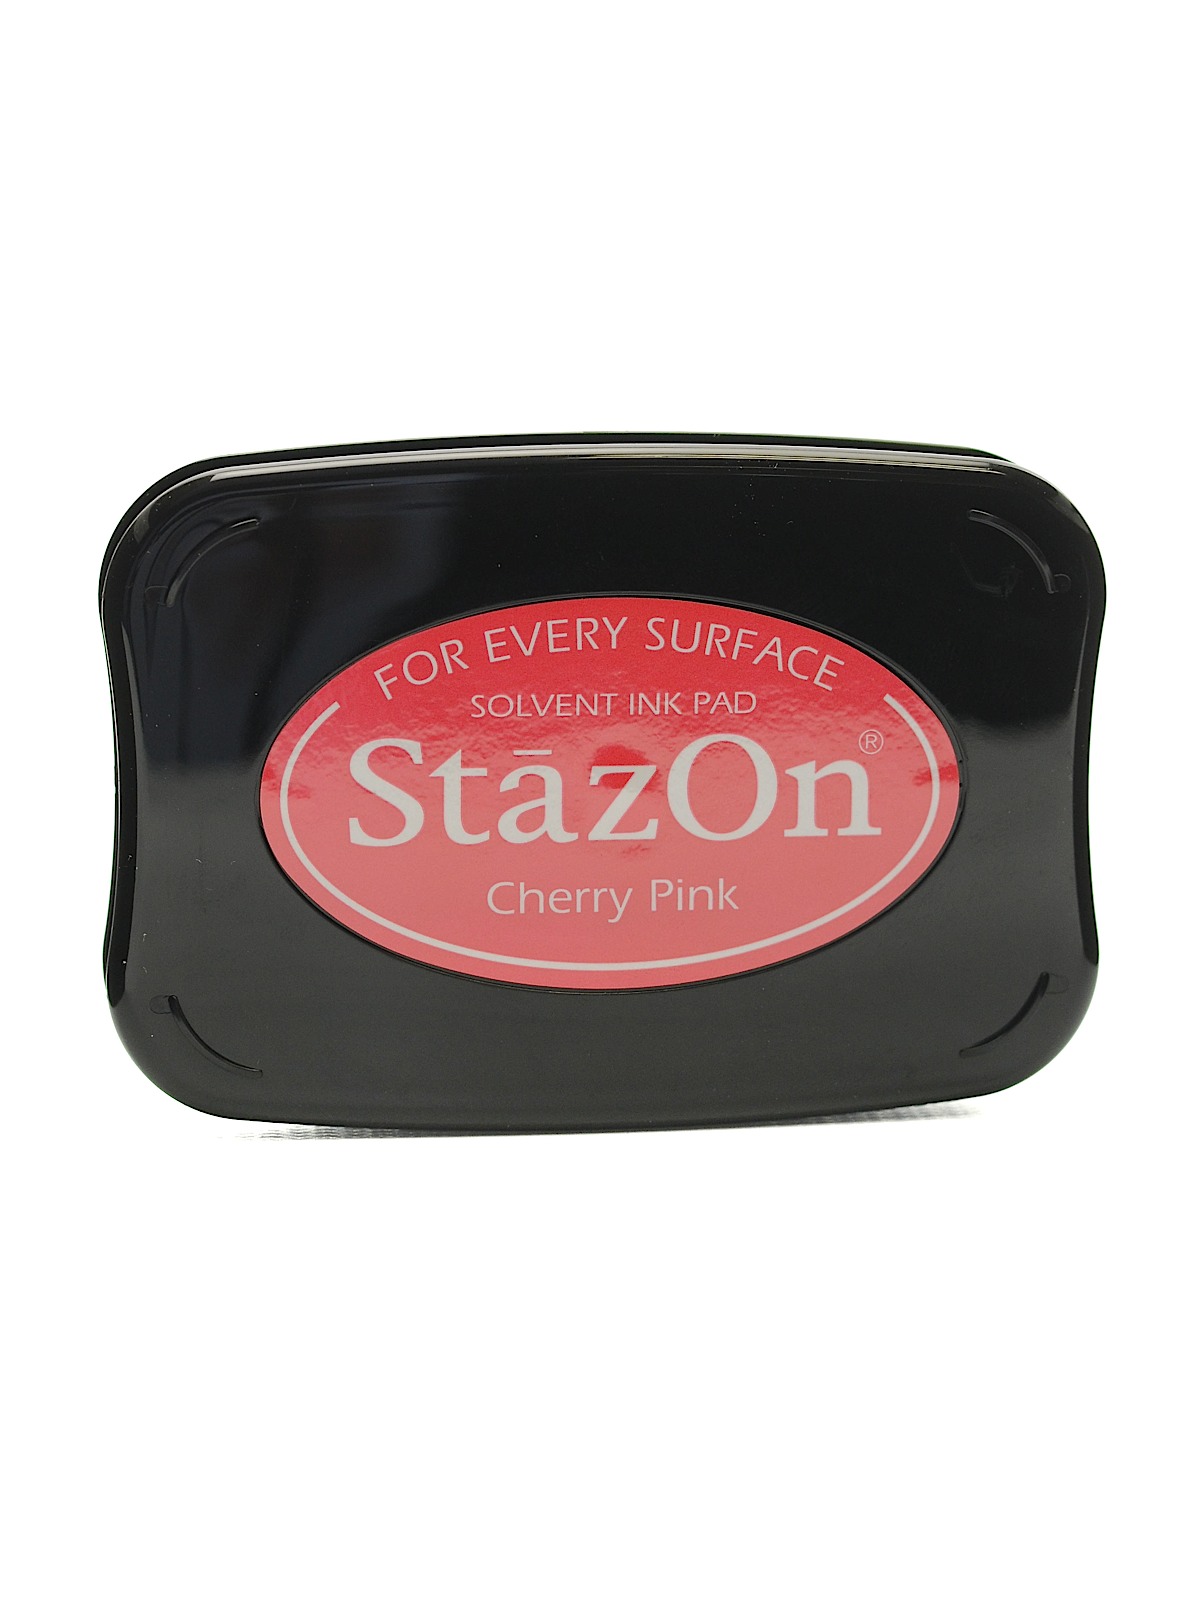 Stazon Solvent Ink Cherry Pink 3.75 In. X 2.625 In. Full-size Pad